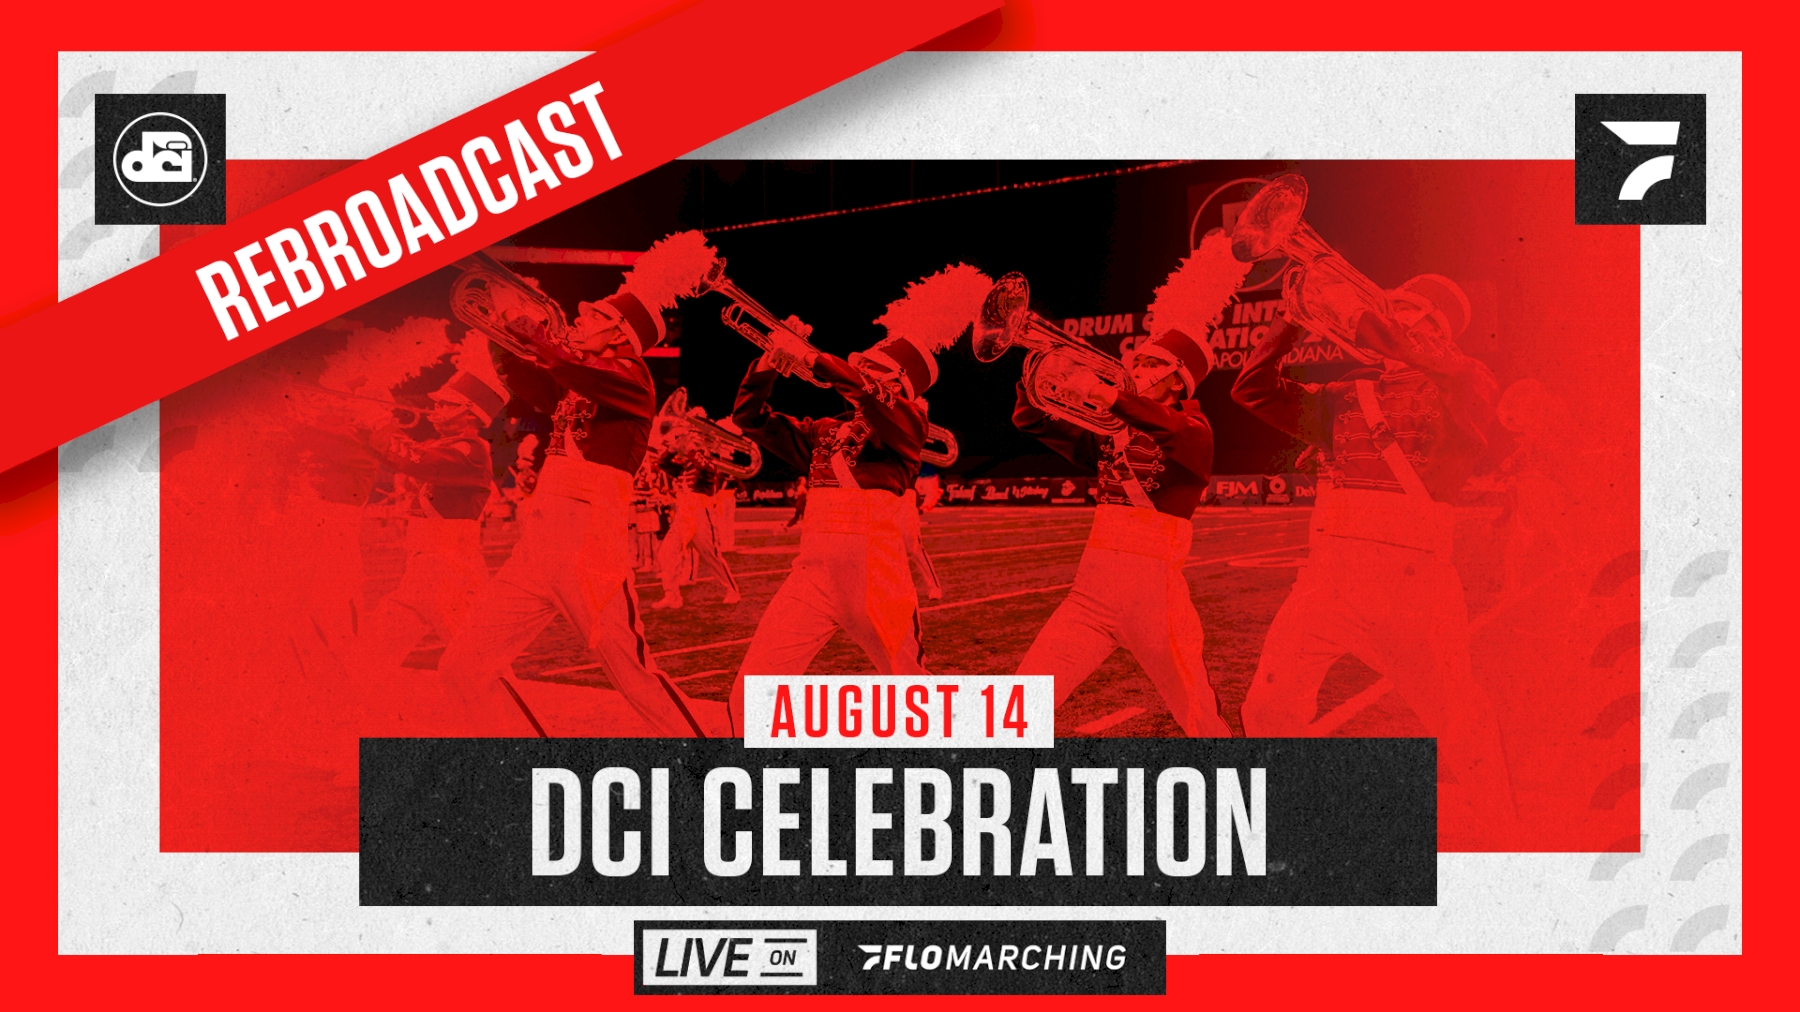 2021 REBROADCAST DCI Celebration Schedule FloMarching